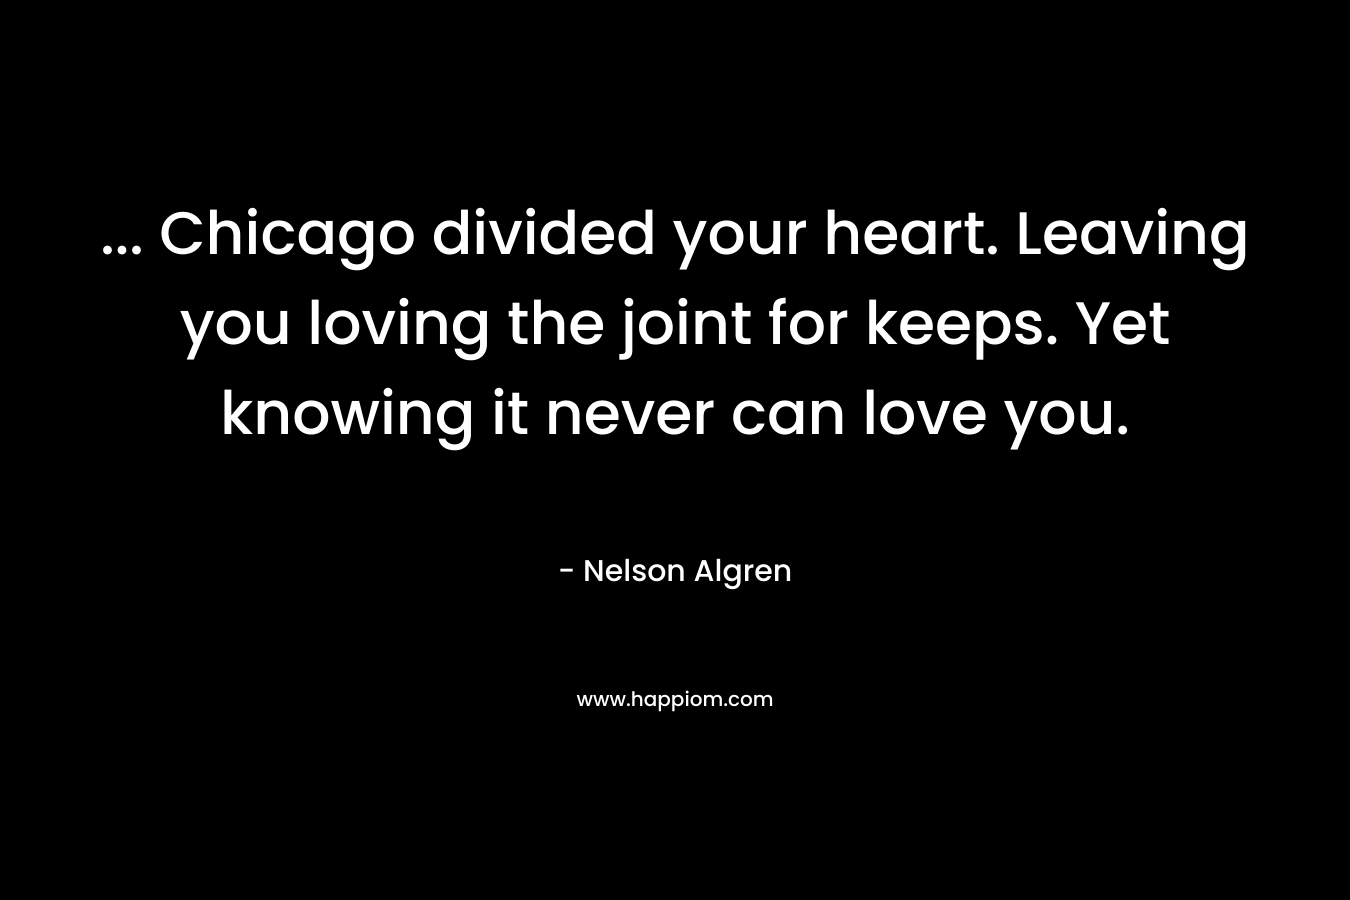 … Chicago divided your heart. Leaving you loving the joint for keeps. Yet knowing it never can love you. – Nelson Algren